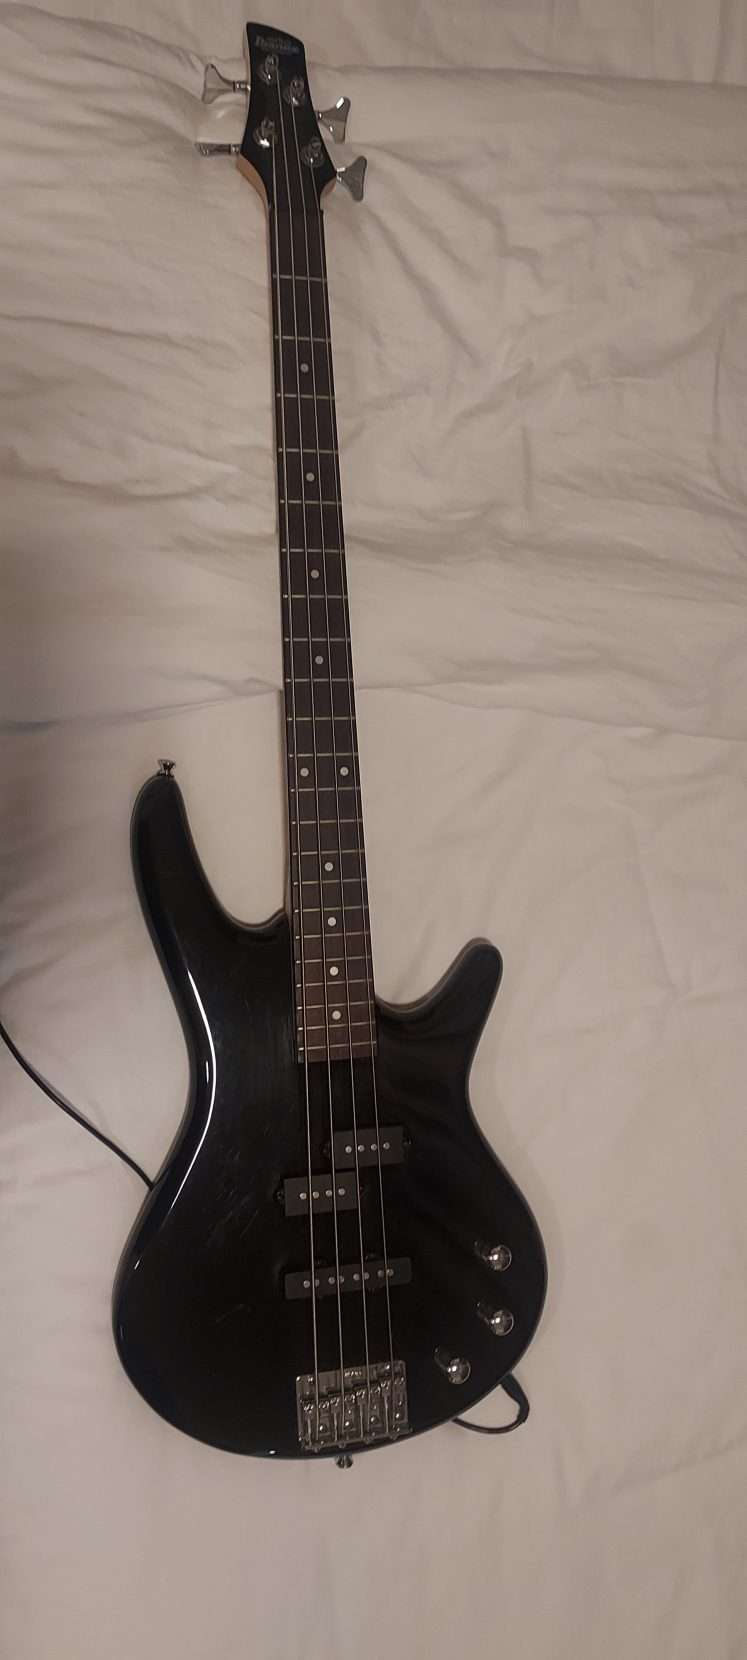 Bass Guitar with amp and gig bag at low price